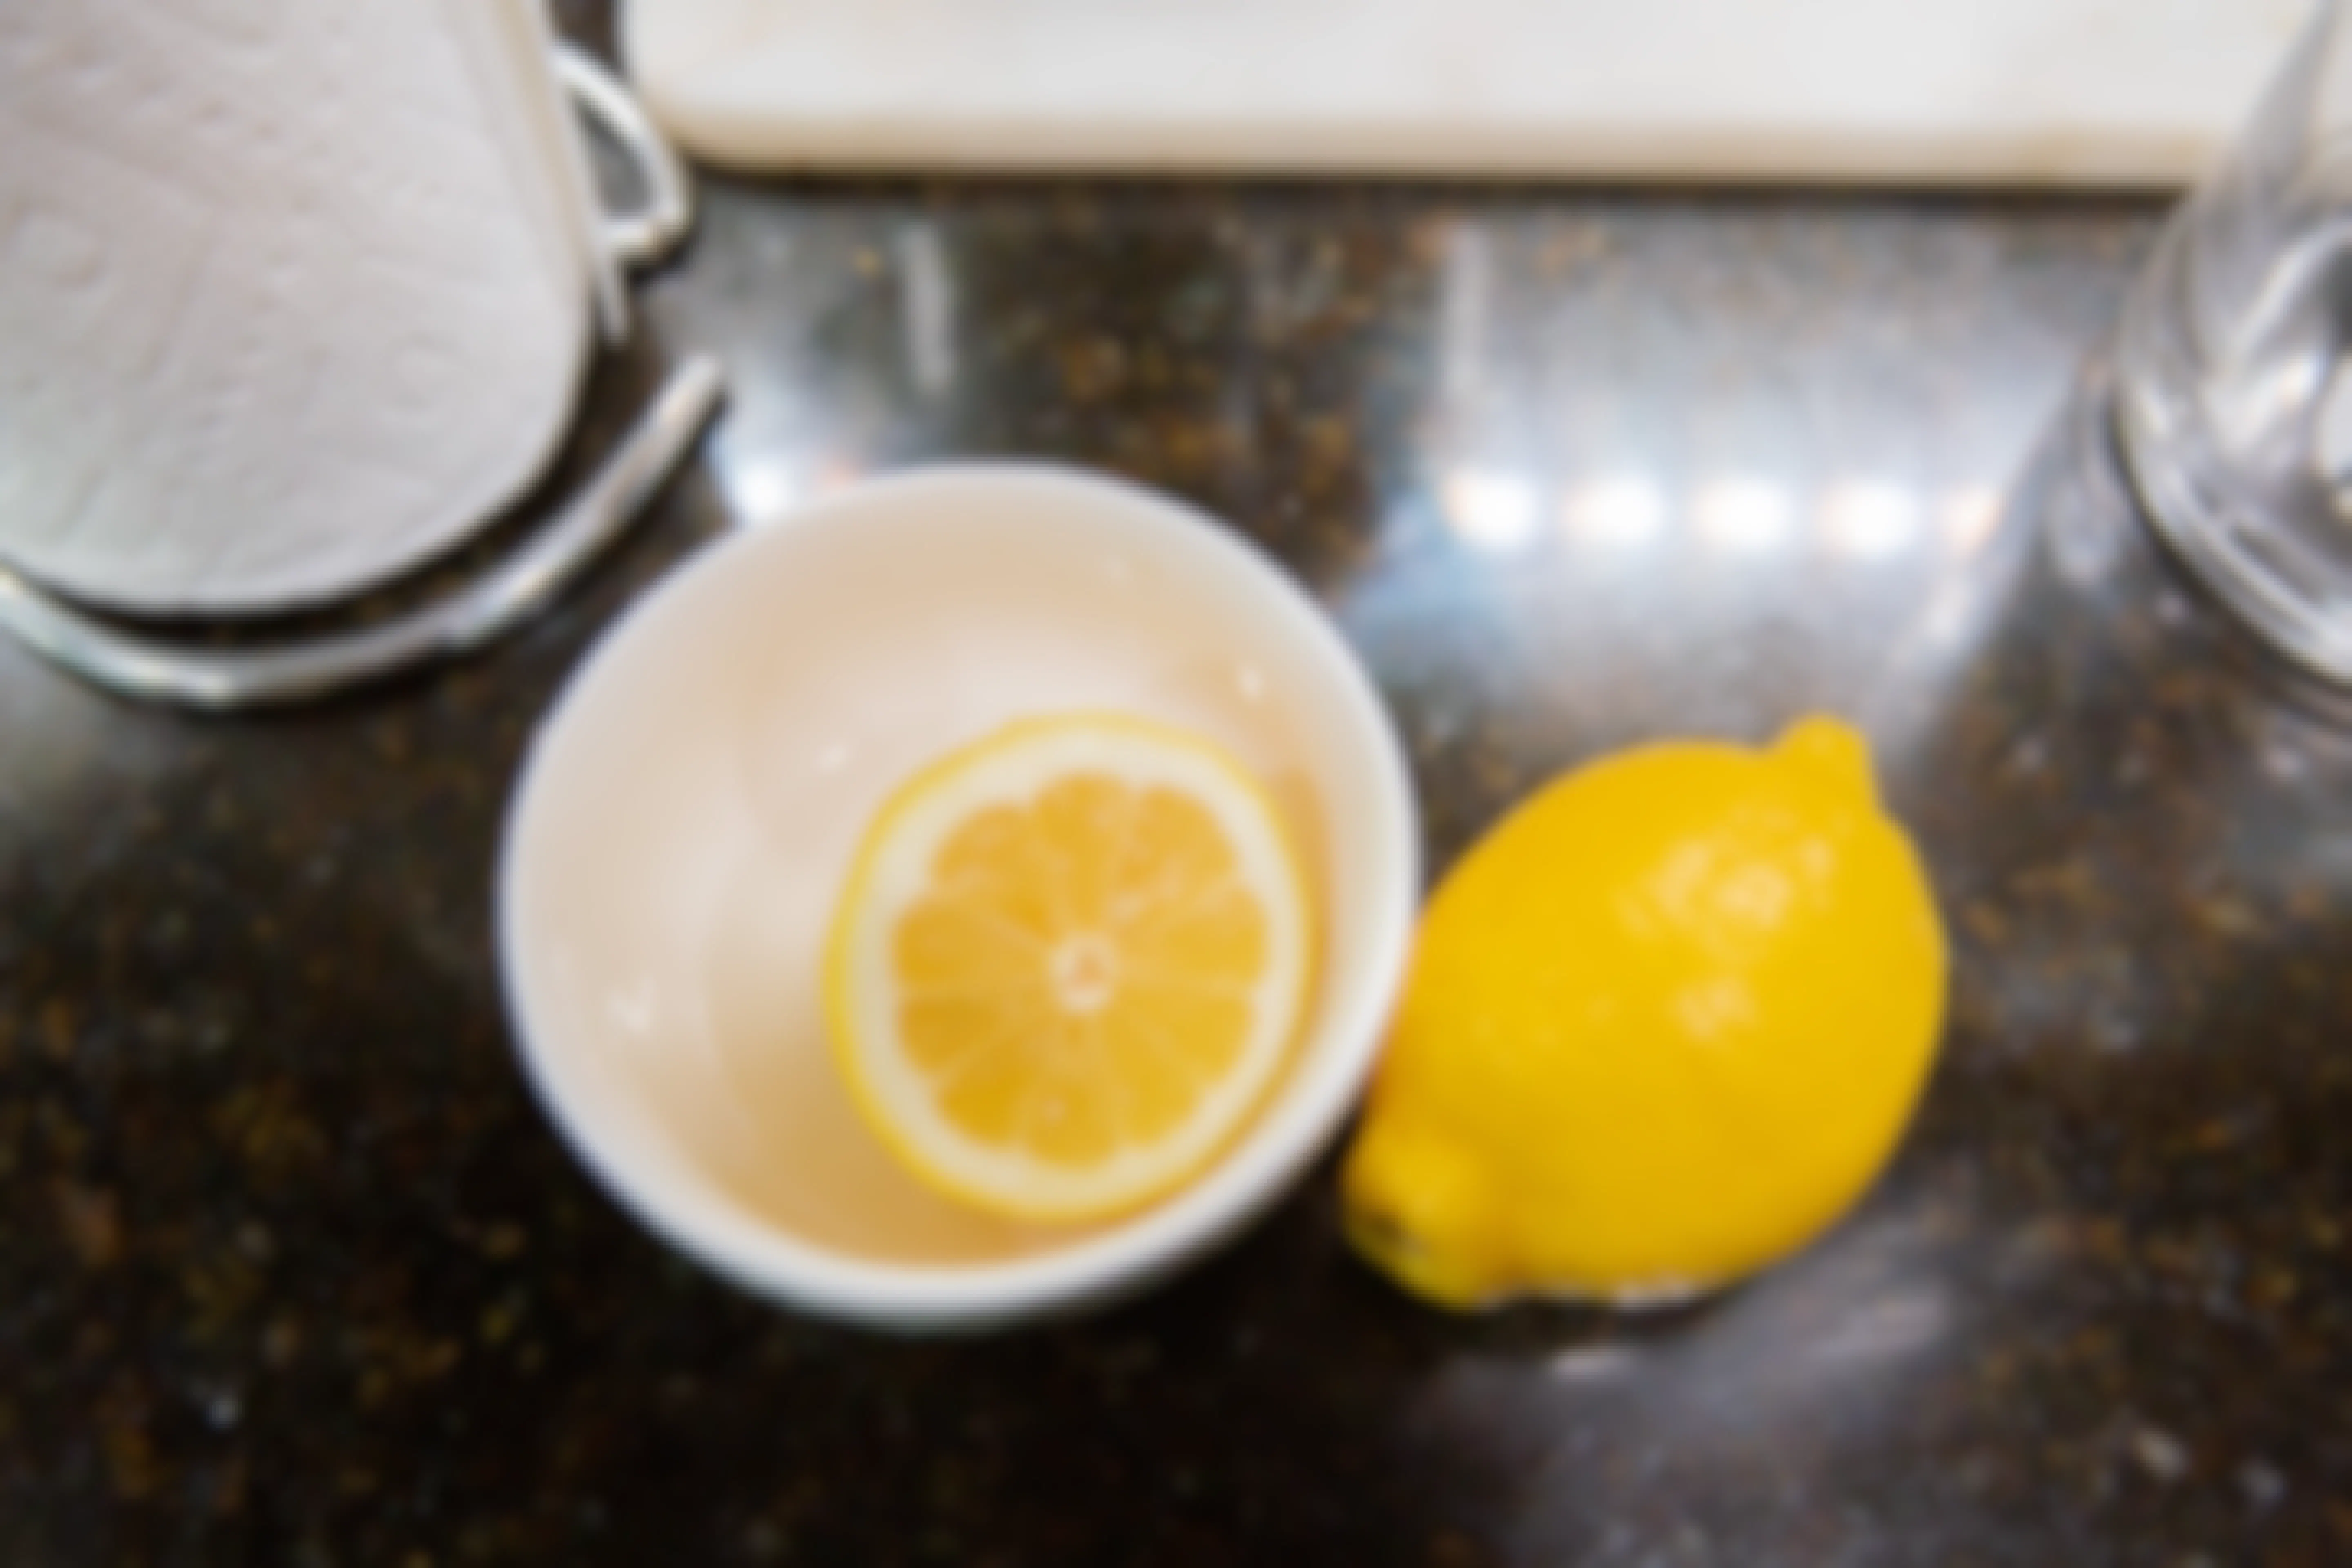 One half cut lemon in a bowl with a full lemon on a kitchen counter